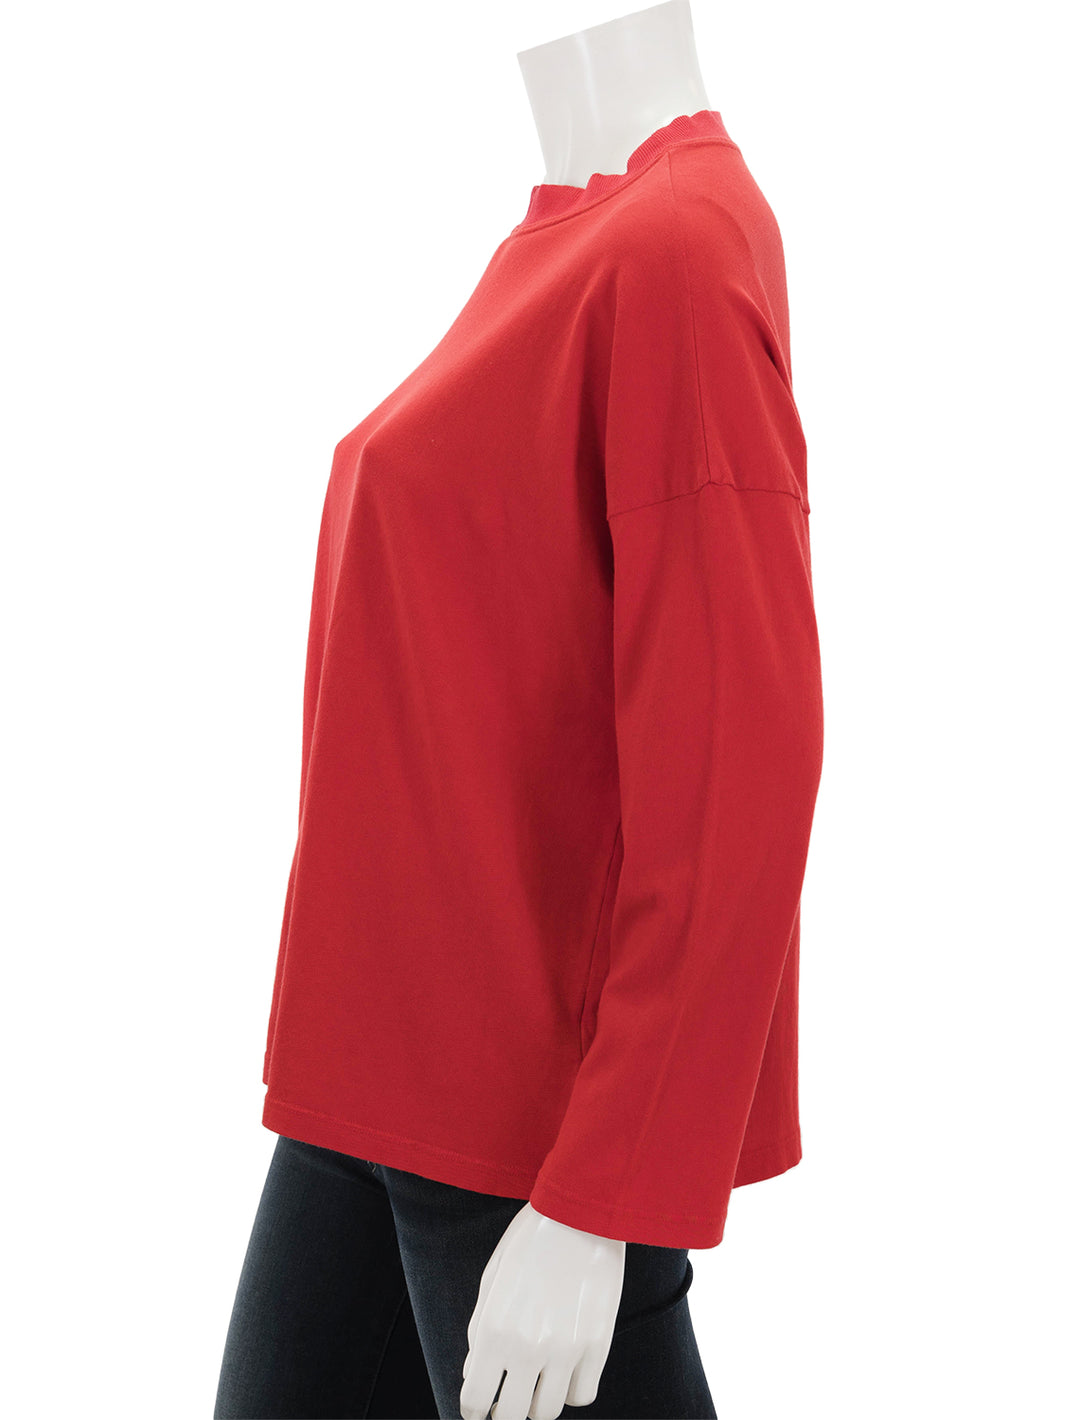 Side view of ASKK NY's long sleeve tee in cherry red.